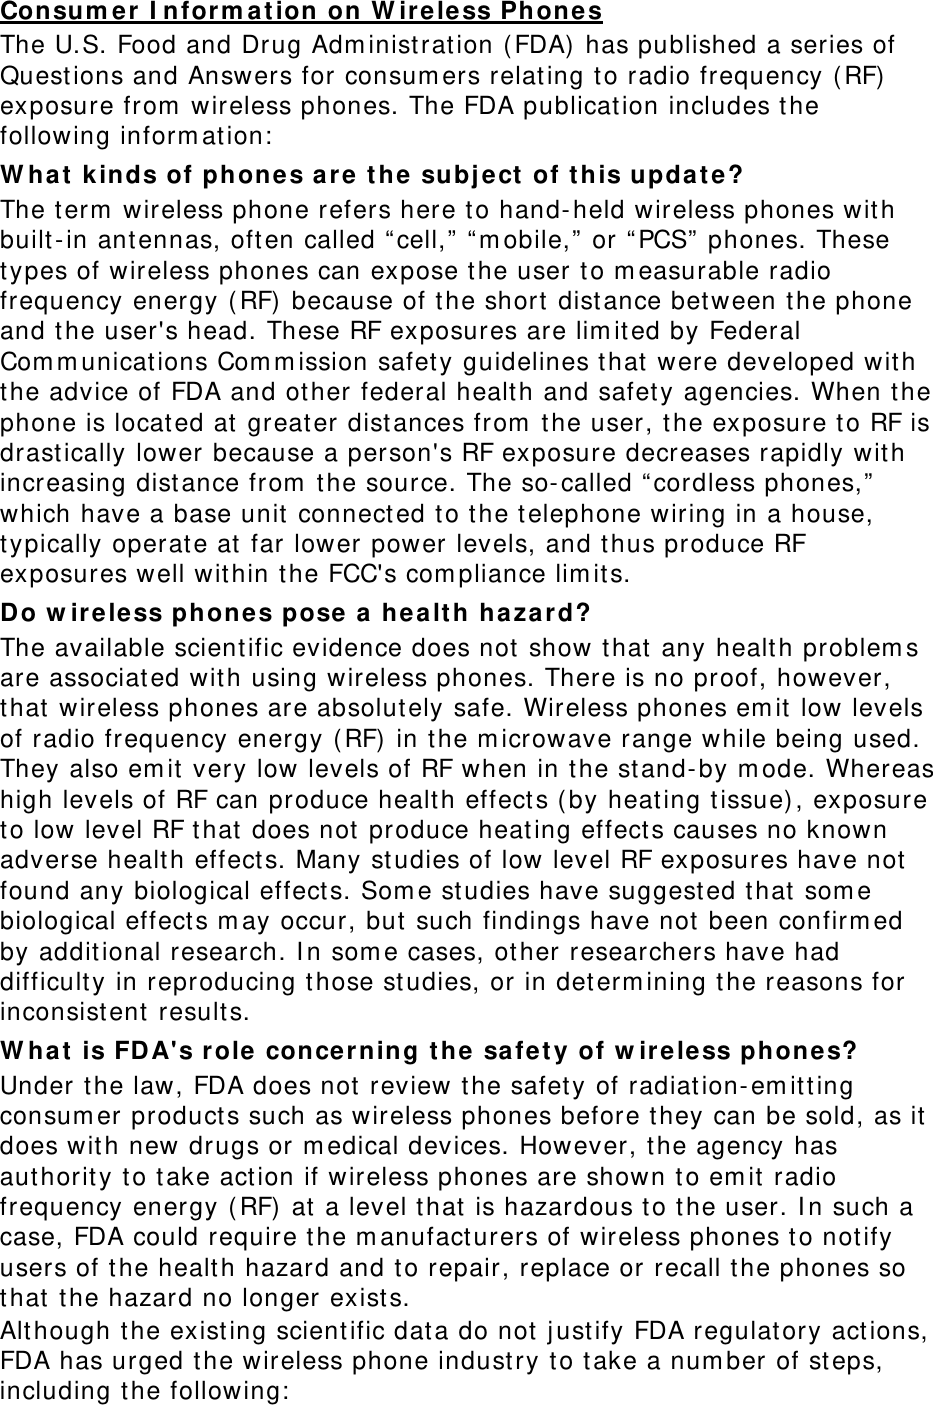 Consum e r  I nfor m ation on W irele ss Phones The U.S. Food and Drug Adm inist rat ion ( FDA)  has published a series of Quest ions and Answers for consum ers relat ing t o radio frequency ( RF)  exposure from  wireless phones. The FDA publicat ion includes t he following inform at ion:  W hat k inds of phone s are t h e  subj ect  of t his upda t e? The t erm  wireless phone refers here t o hand- held wireless phones with built- in ant ennas, oft en called “ cell,” “ m obile,” or “ PCS”  phones. These types of wireless phones can expose t he user to m easurable radio frequency energy ( RF)  because of t he short  distance bet ween the phone and t he user&apos;s head. These RF exposures are lim it ed by Federal Com m unications Com m ission safet y guidelines that were developed with the advice of FDA and ot her federal healt h and safety agencies. When the phone is located at  greater distances from  t he user, t he exposure t o RF is drastically lower because a person&apos;s RF exposure decreases rapidly wit h increasing dist ance from  t he source. The so- called “ cordless phones,”  which have a base unit  connect ed t o the t elephone wiring in a house, typically operate at  far lower power levels, and t hus produce RF exposures well wit hin t he FCC&apos;s com pliance lim its. Do w ireless phone s pose a healt h hazard? The available scient ific evidence does not show that any healt h problem s are associat ed wit h using wireless phones. There is no proof, however, that  wireless phones are absolutely safe. Wireless phones em it  low levels of radio frequency energy ( RF)  in t he m icrowave range while being used. They also em it  very low levels of RF when in the st and- by m ode. Whereas high levels of RF can produce healt h effect s ( by heating t issue) , exposure to low level RF t hat  does not  produce heat ing effect s causes no known adverse health effect s. Many studies of low level RF exposures have not  found any biological effects. Som e st udies have suggested t hat  som e biological effect s m ay occur, but such findings have not  been confirm ed by addit ional research. I n som e cases, ot her researchers have had difficult y in reproducing t hose studies, or in det erm ining t he reasons for inconsist ent  results. W hat is FD A&apos;s r ole  concernin g t he sa fe t y of w ireless phone s? Under the law, FDA does not review t he safet y of radiat ion- em it t ing consum er product s such as wireless phones before they can be sold, as it  does wit h new drugs or m edical devices. However, the agency has aut horit y to take act ion if wireless phones are shown t o em it  radio frequency energy ( RF)  at  a level t hat  is hazardous t o t he user. I n such a case, FDA could require t he m anufact urers of wireless phones to notify users of t he healt h hazard and t o repair, replace or recall the phones so that  the hazard no longer exists. Although the exist ing scient ific dat a do not  j ust ify FDA regulat ory actions, FDA has urged the wireless phone indust ry t o t ake a num ber of st eps, including t he following:  